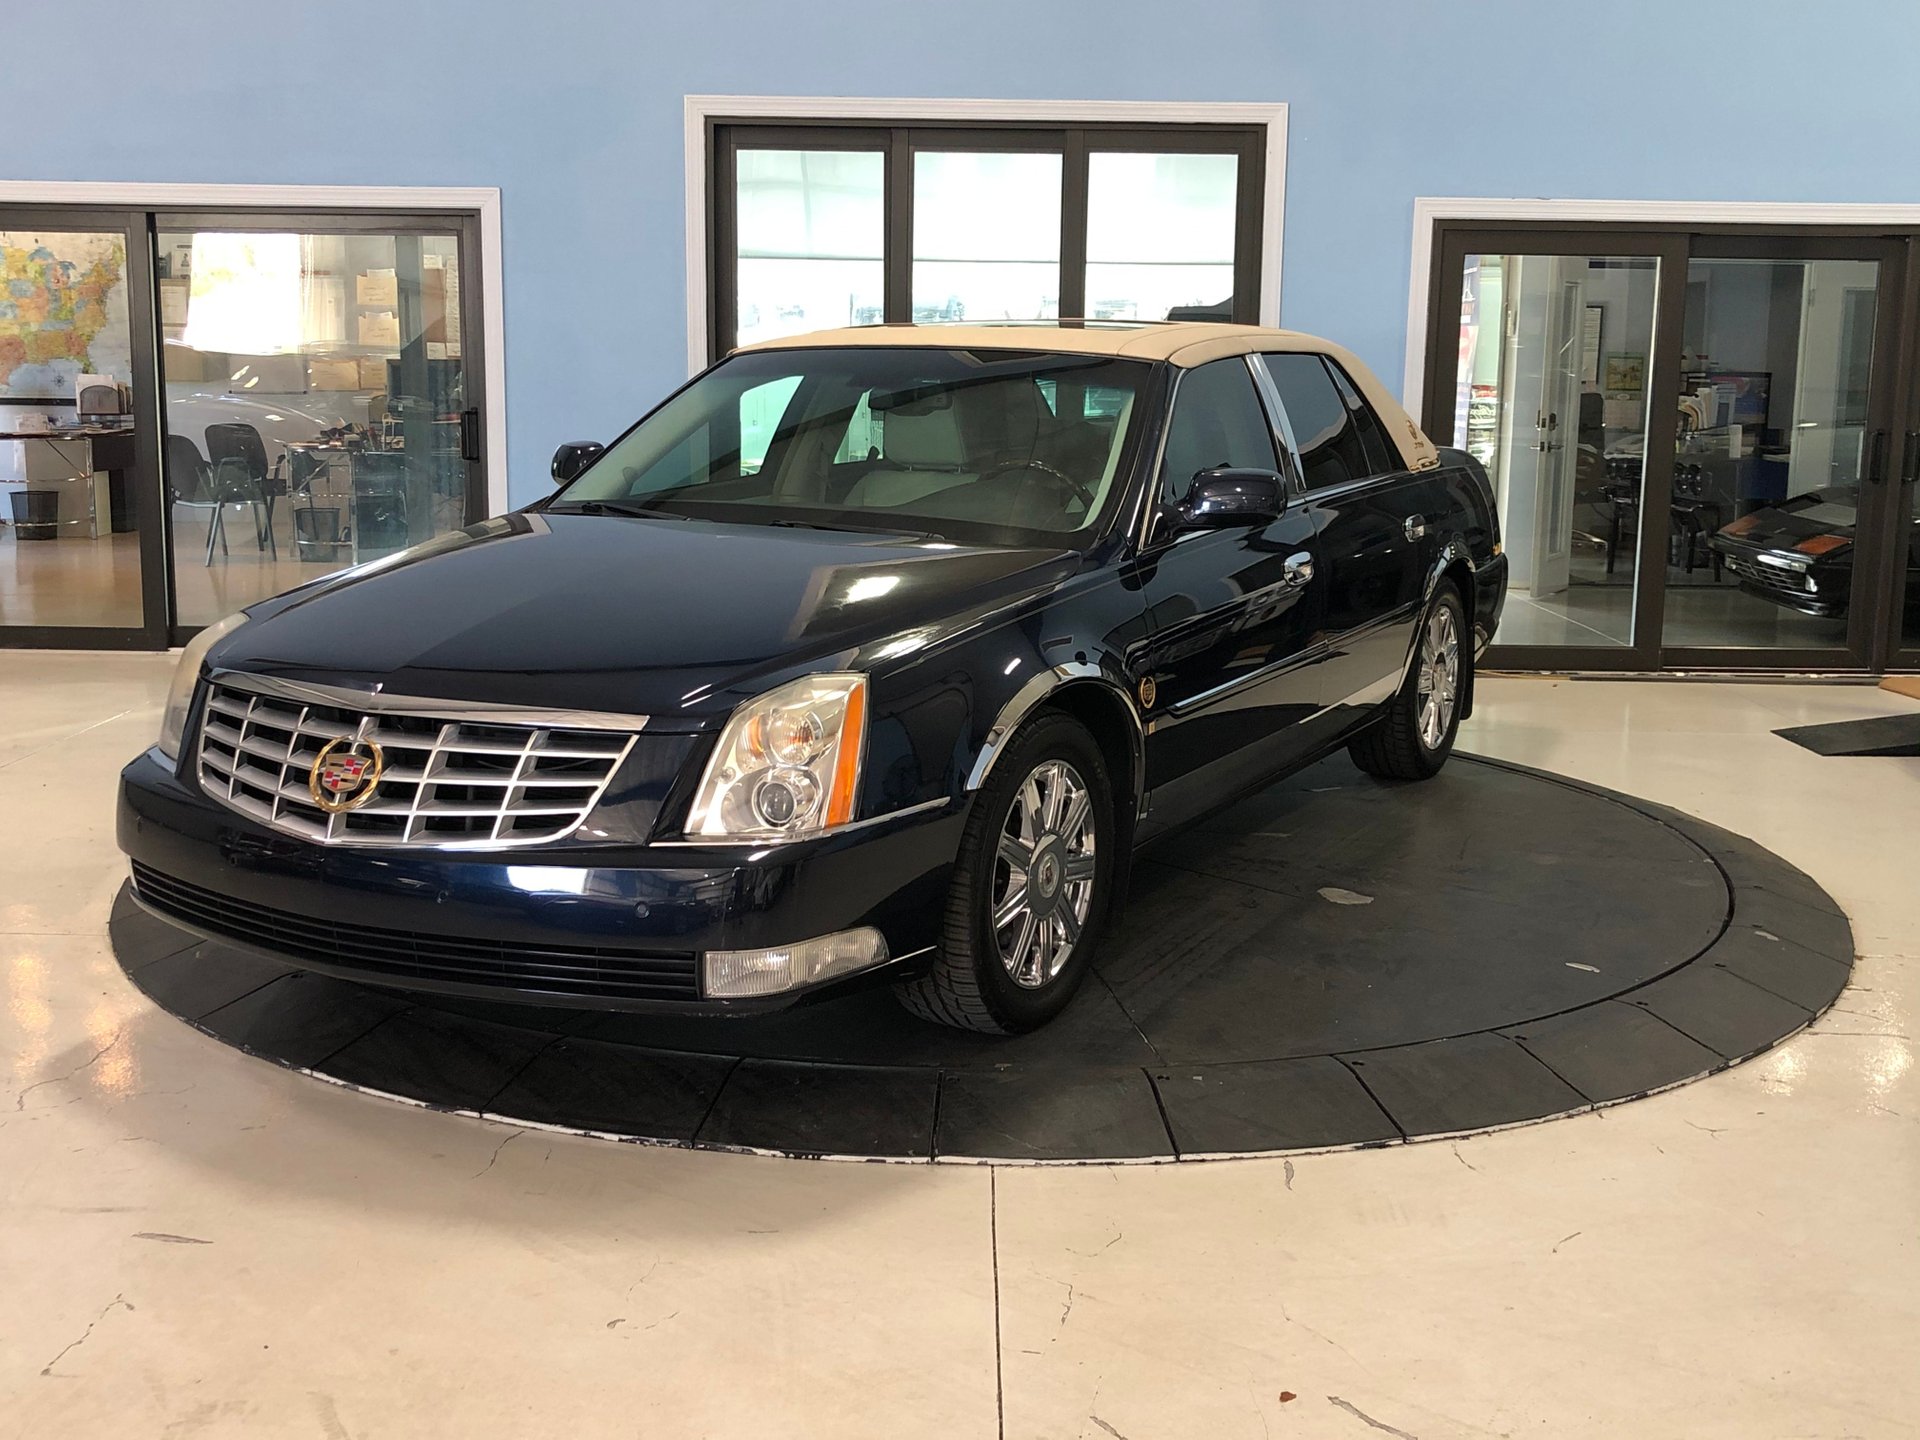 2008 Cadillac DTS | Classic Cars & Used Cars For Sale in Tampa, FL